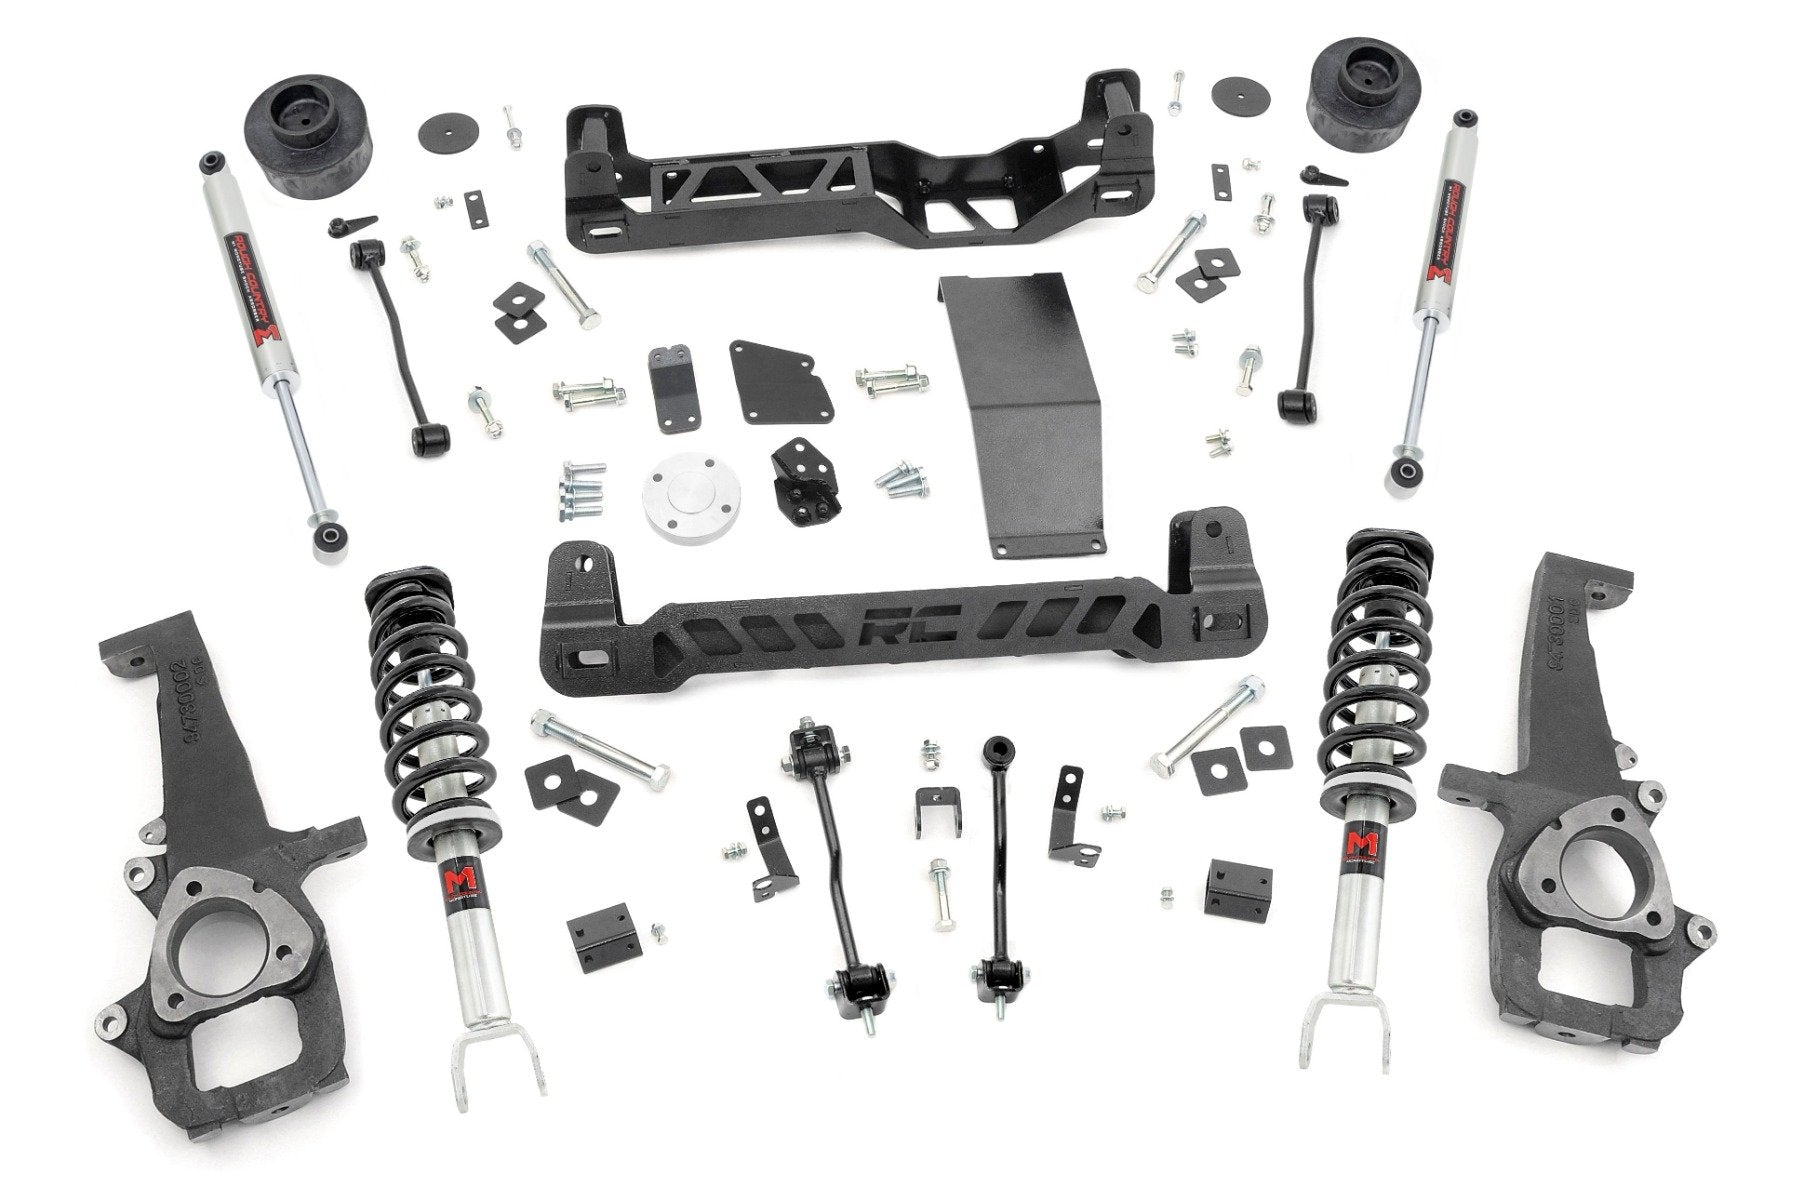 Rough Country 4 Inch Lift Kit | M1 Struts | Ram 1500 4WD (2012-2018 & Classic)